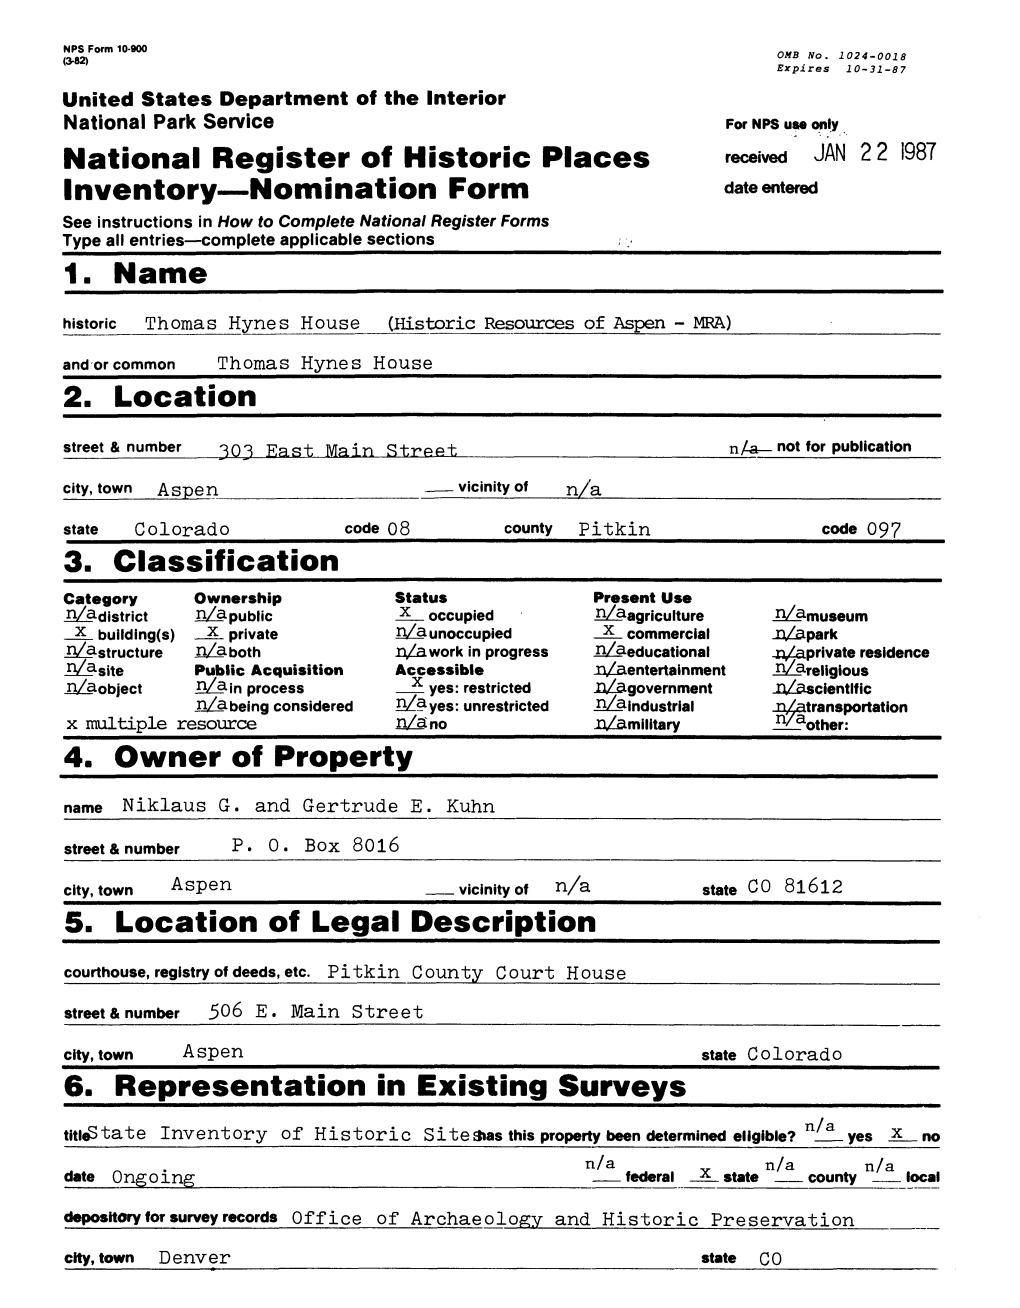 National Register of Historic Places Inventory — Nomination Form 1. Name Received JAN 22